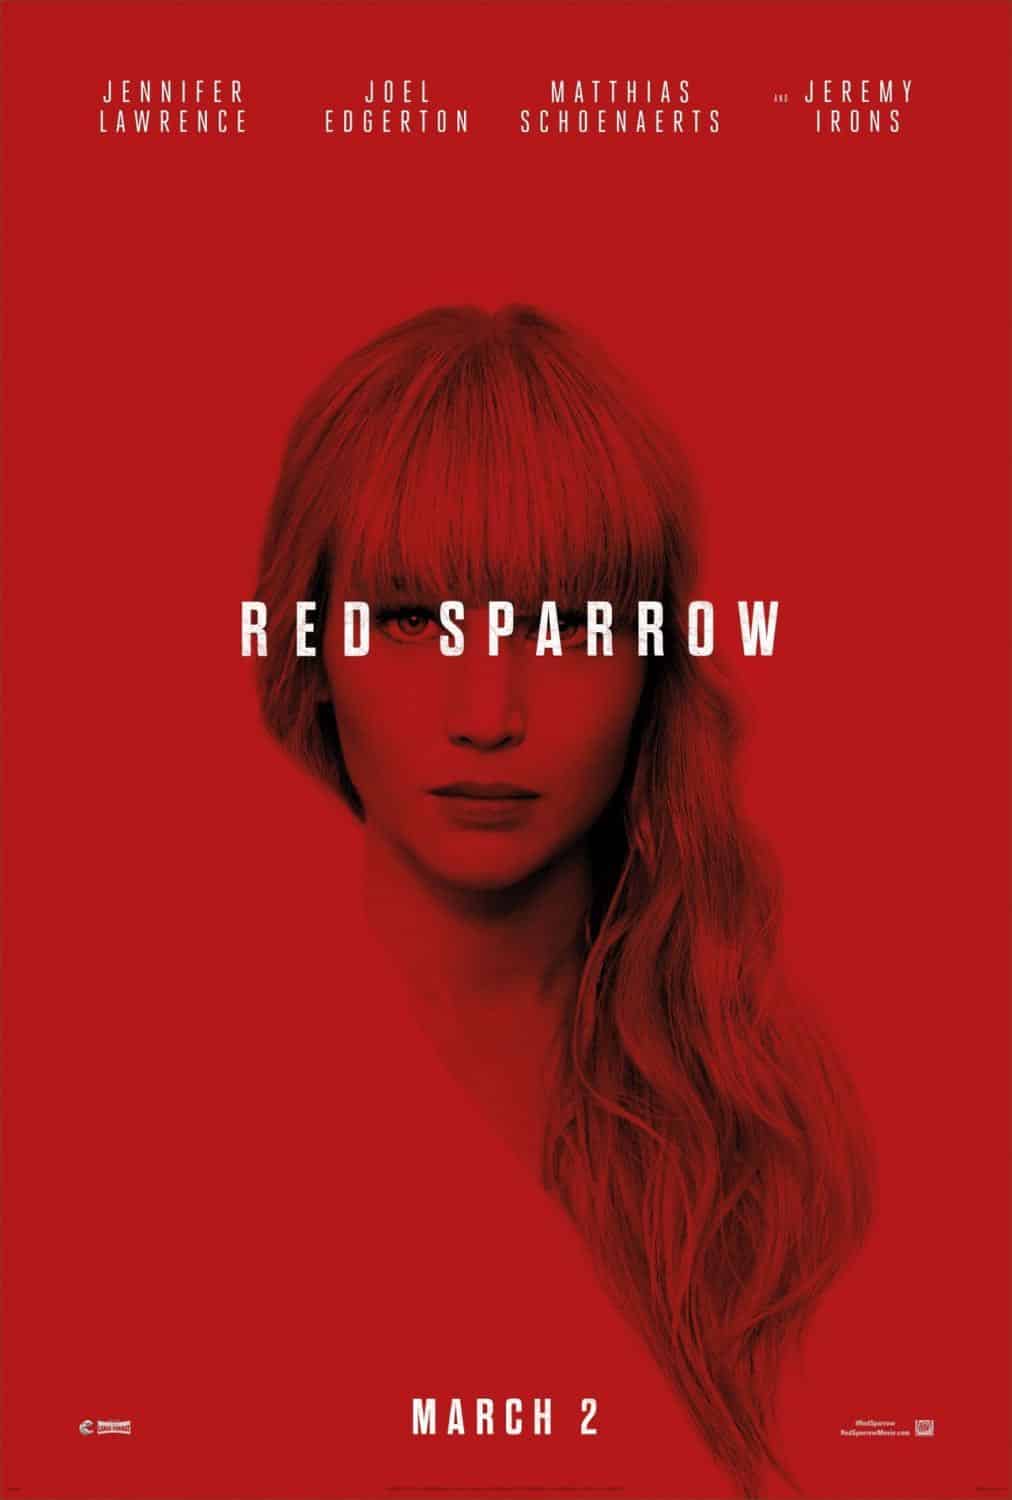 Red Sparrow – Trailer #2